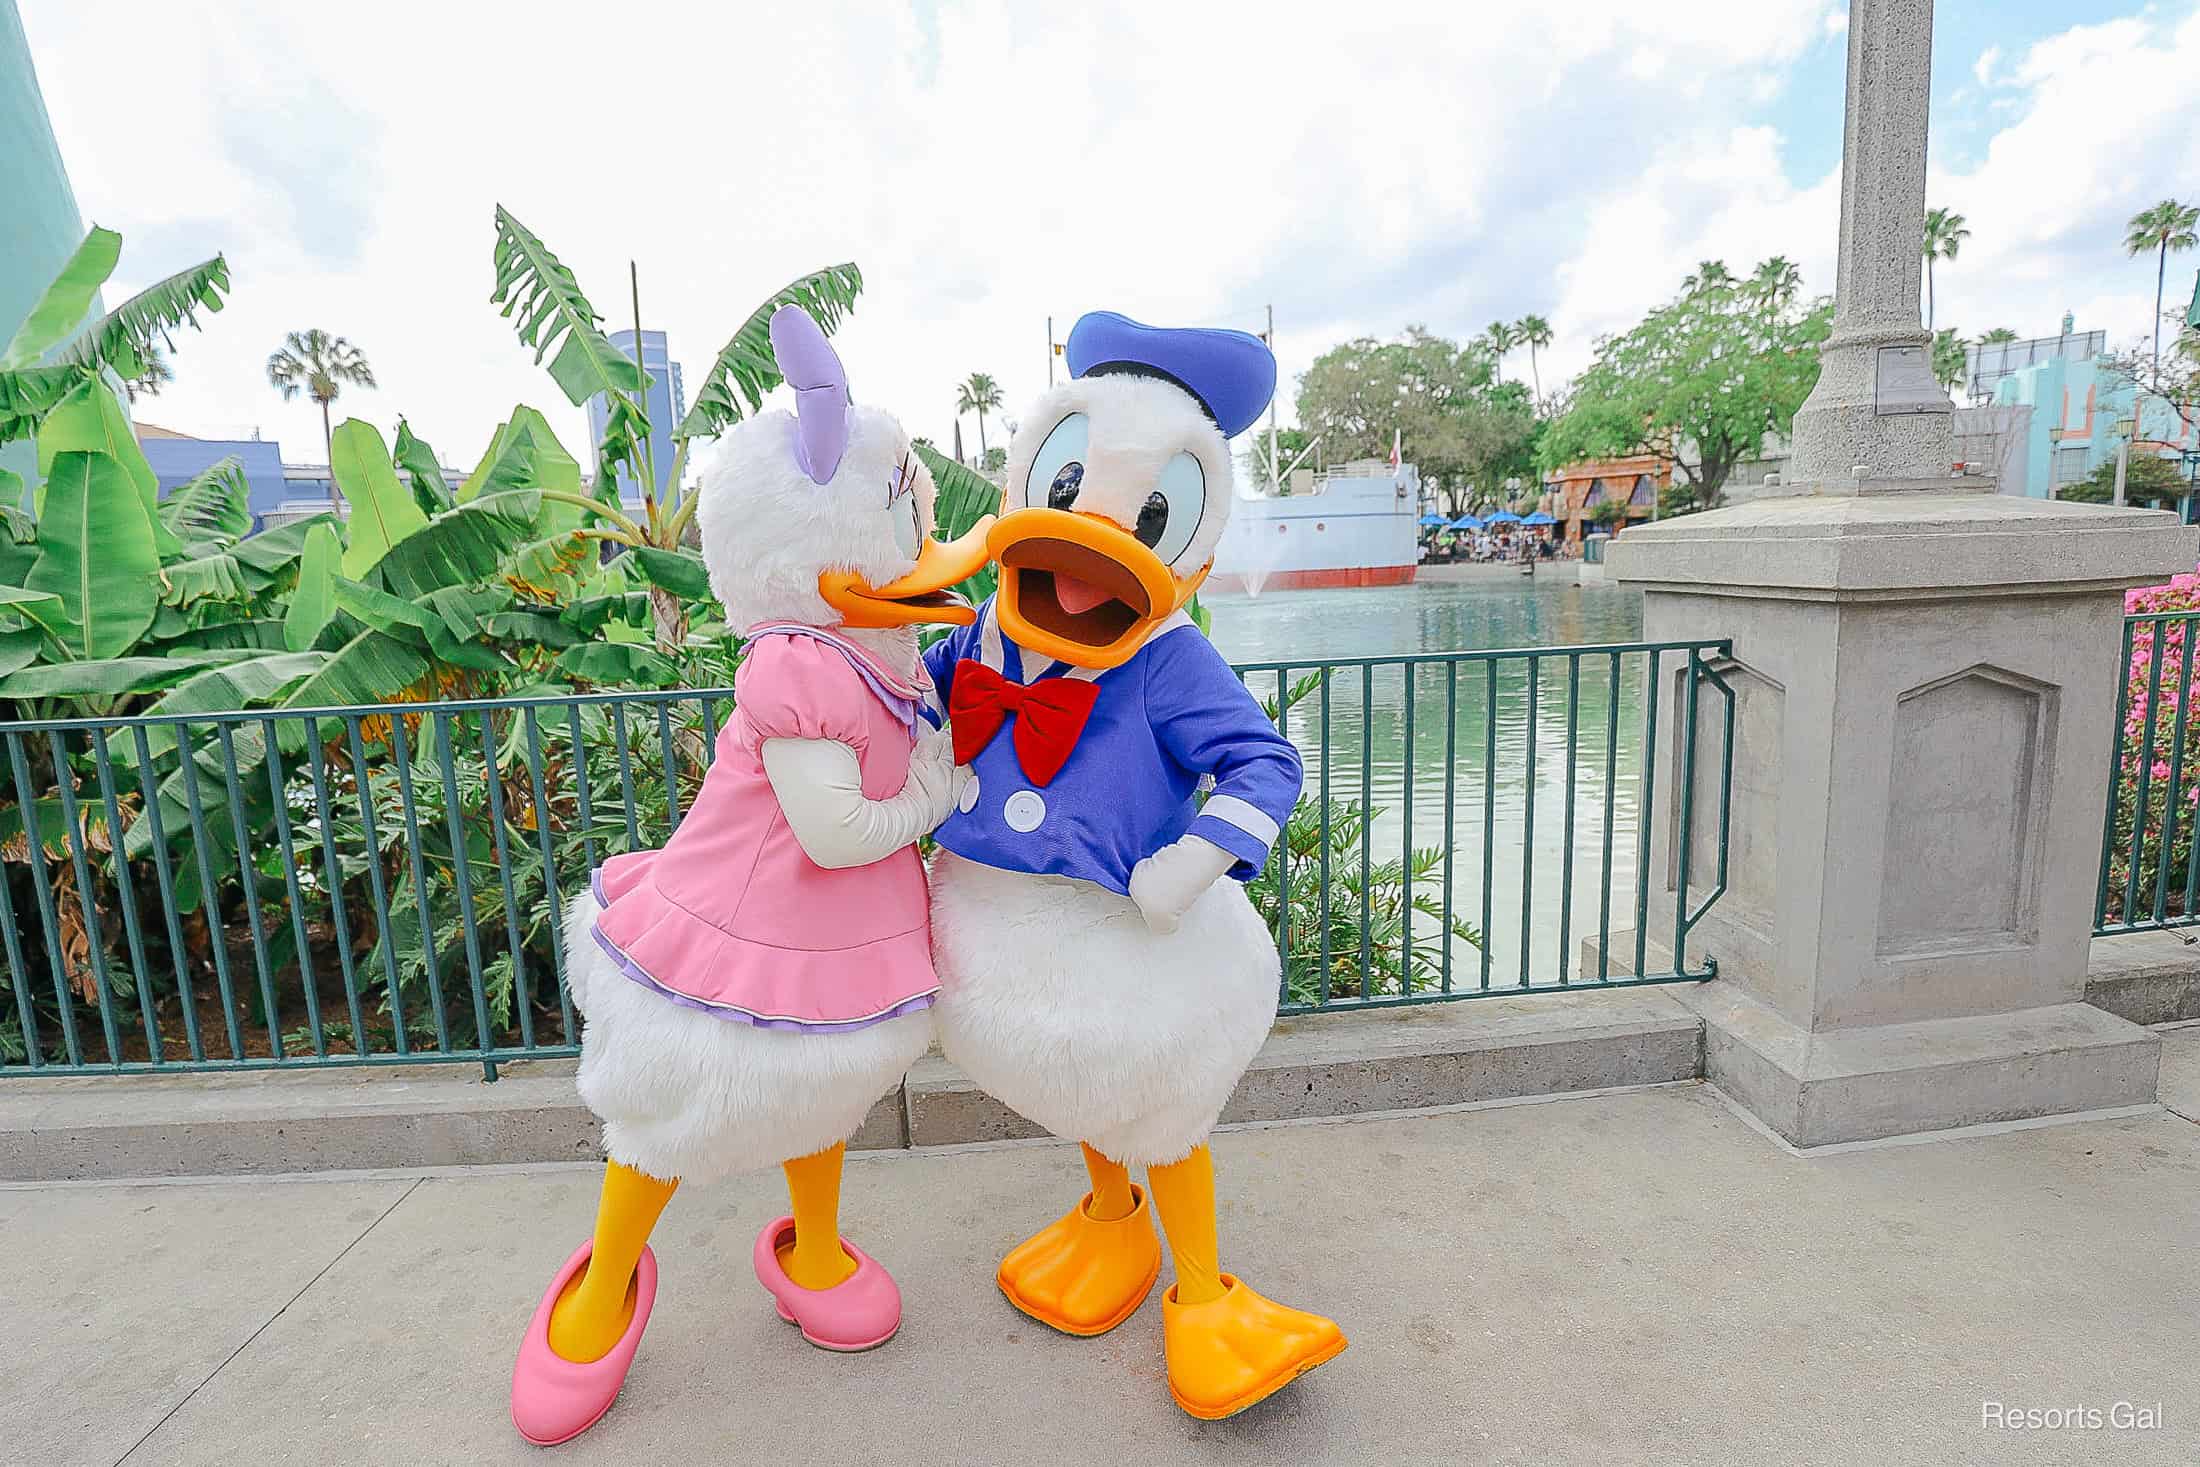 Daisy leans in to give Donald a kiss on the sheet. 